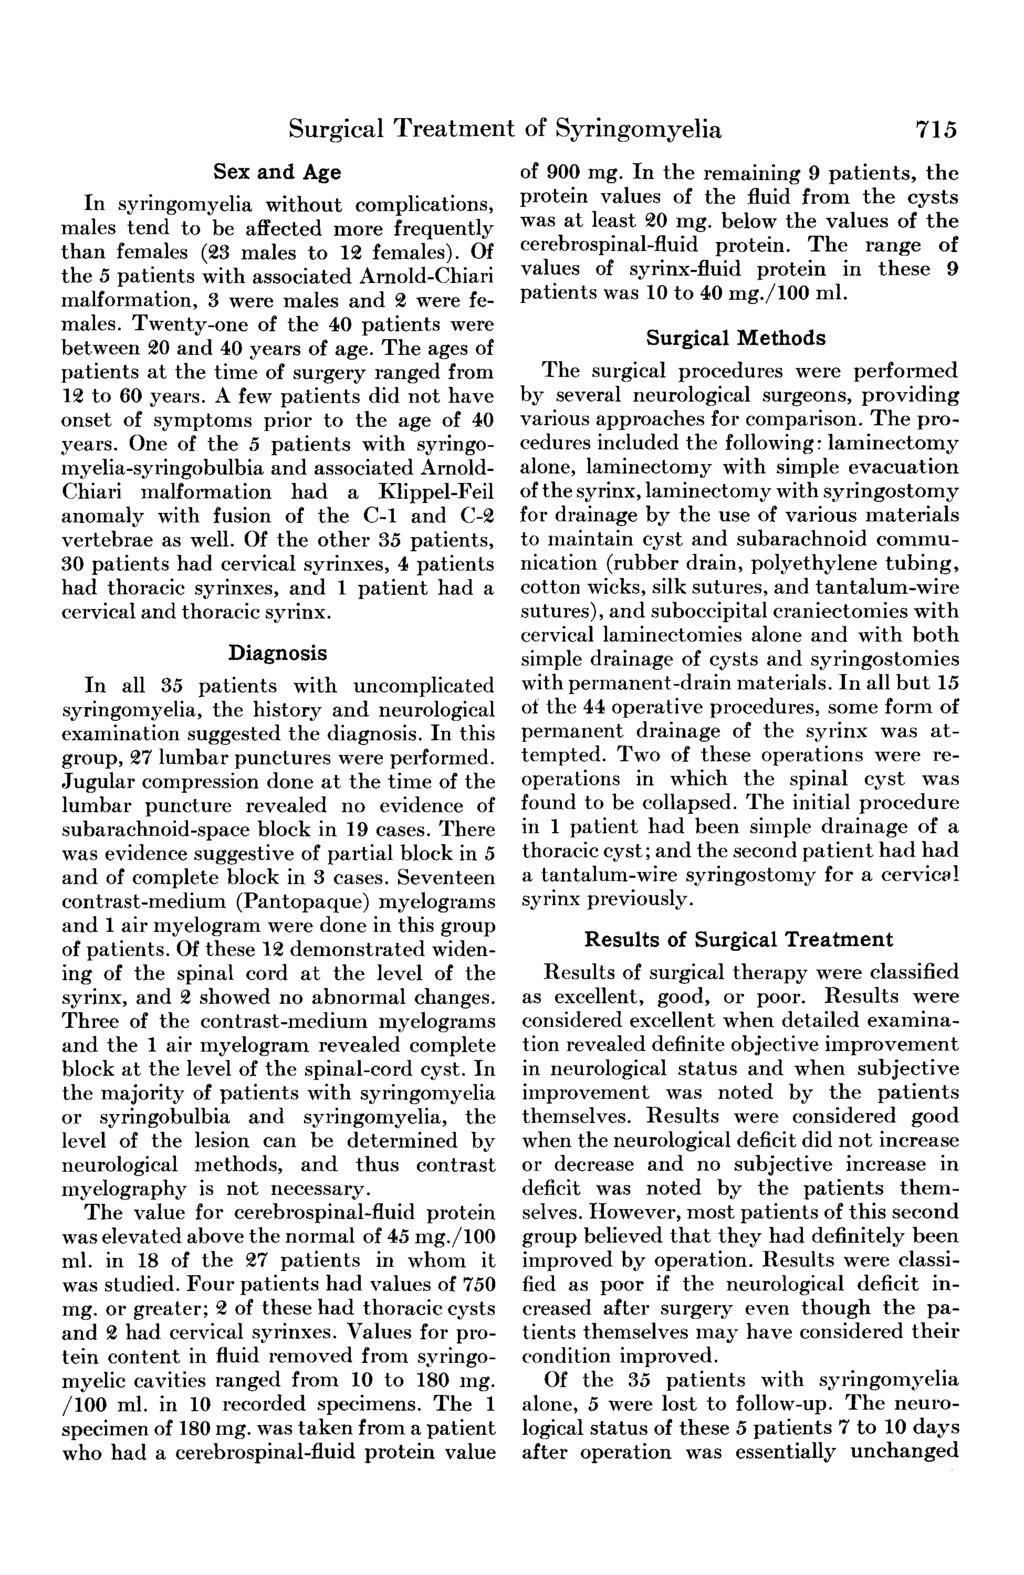 Surgical Treatment of Syringomyelia 715 Sex and Age In syringomyelia without complications, males tend to be affected more frequently than females (23 males to 12 females).